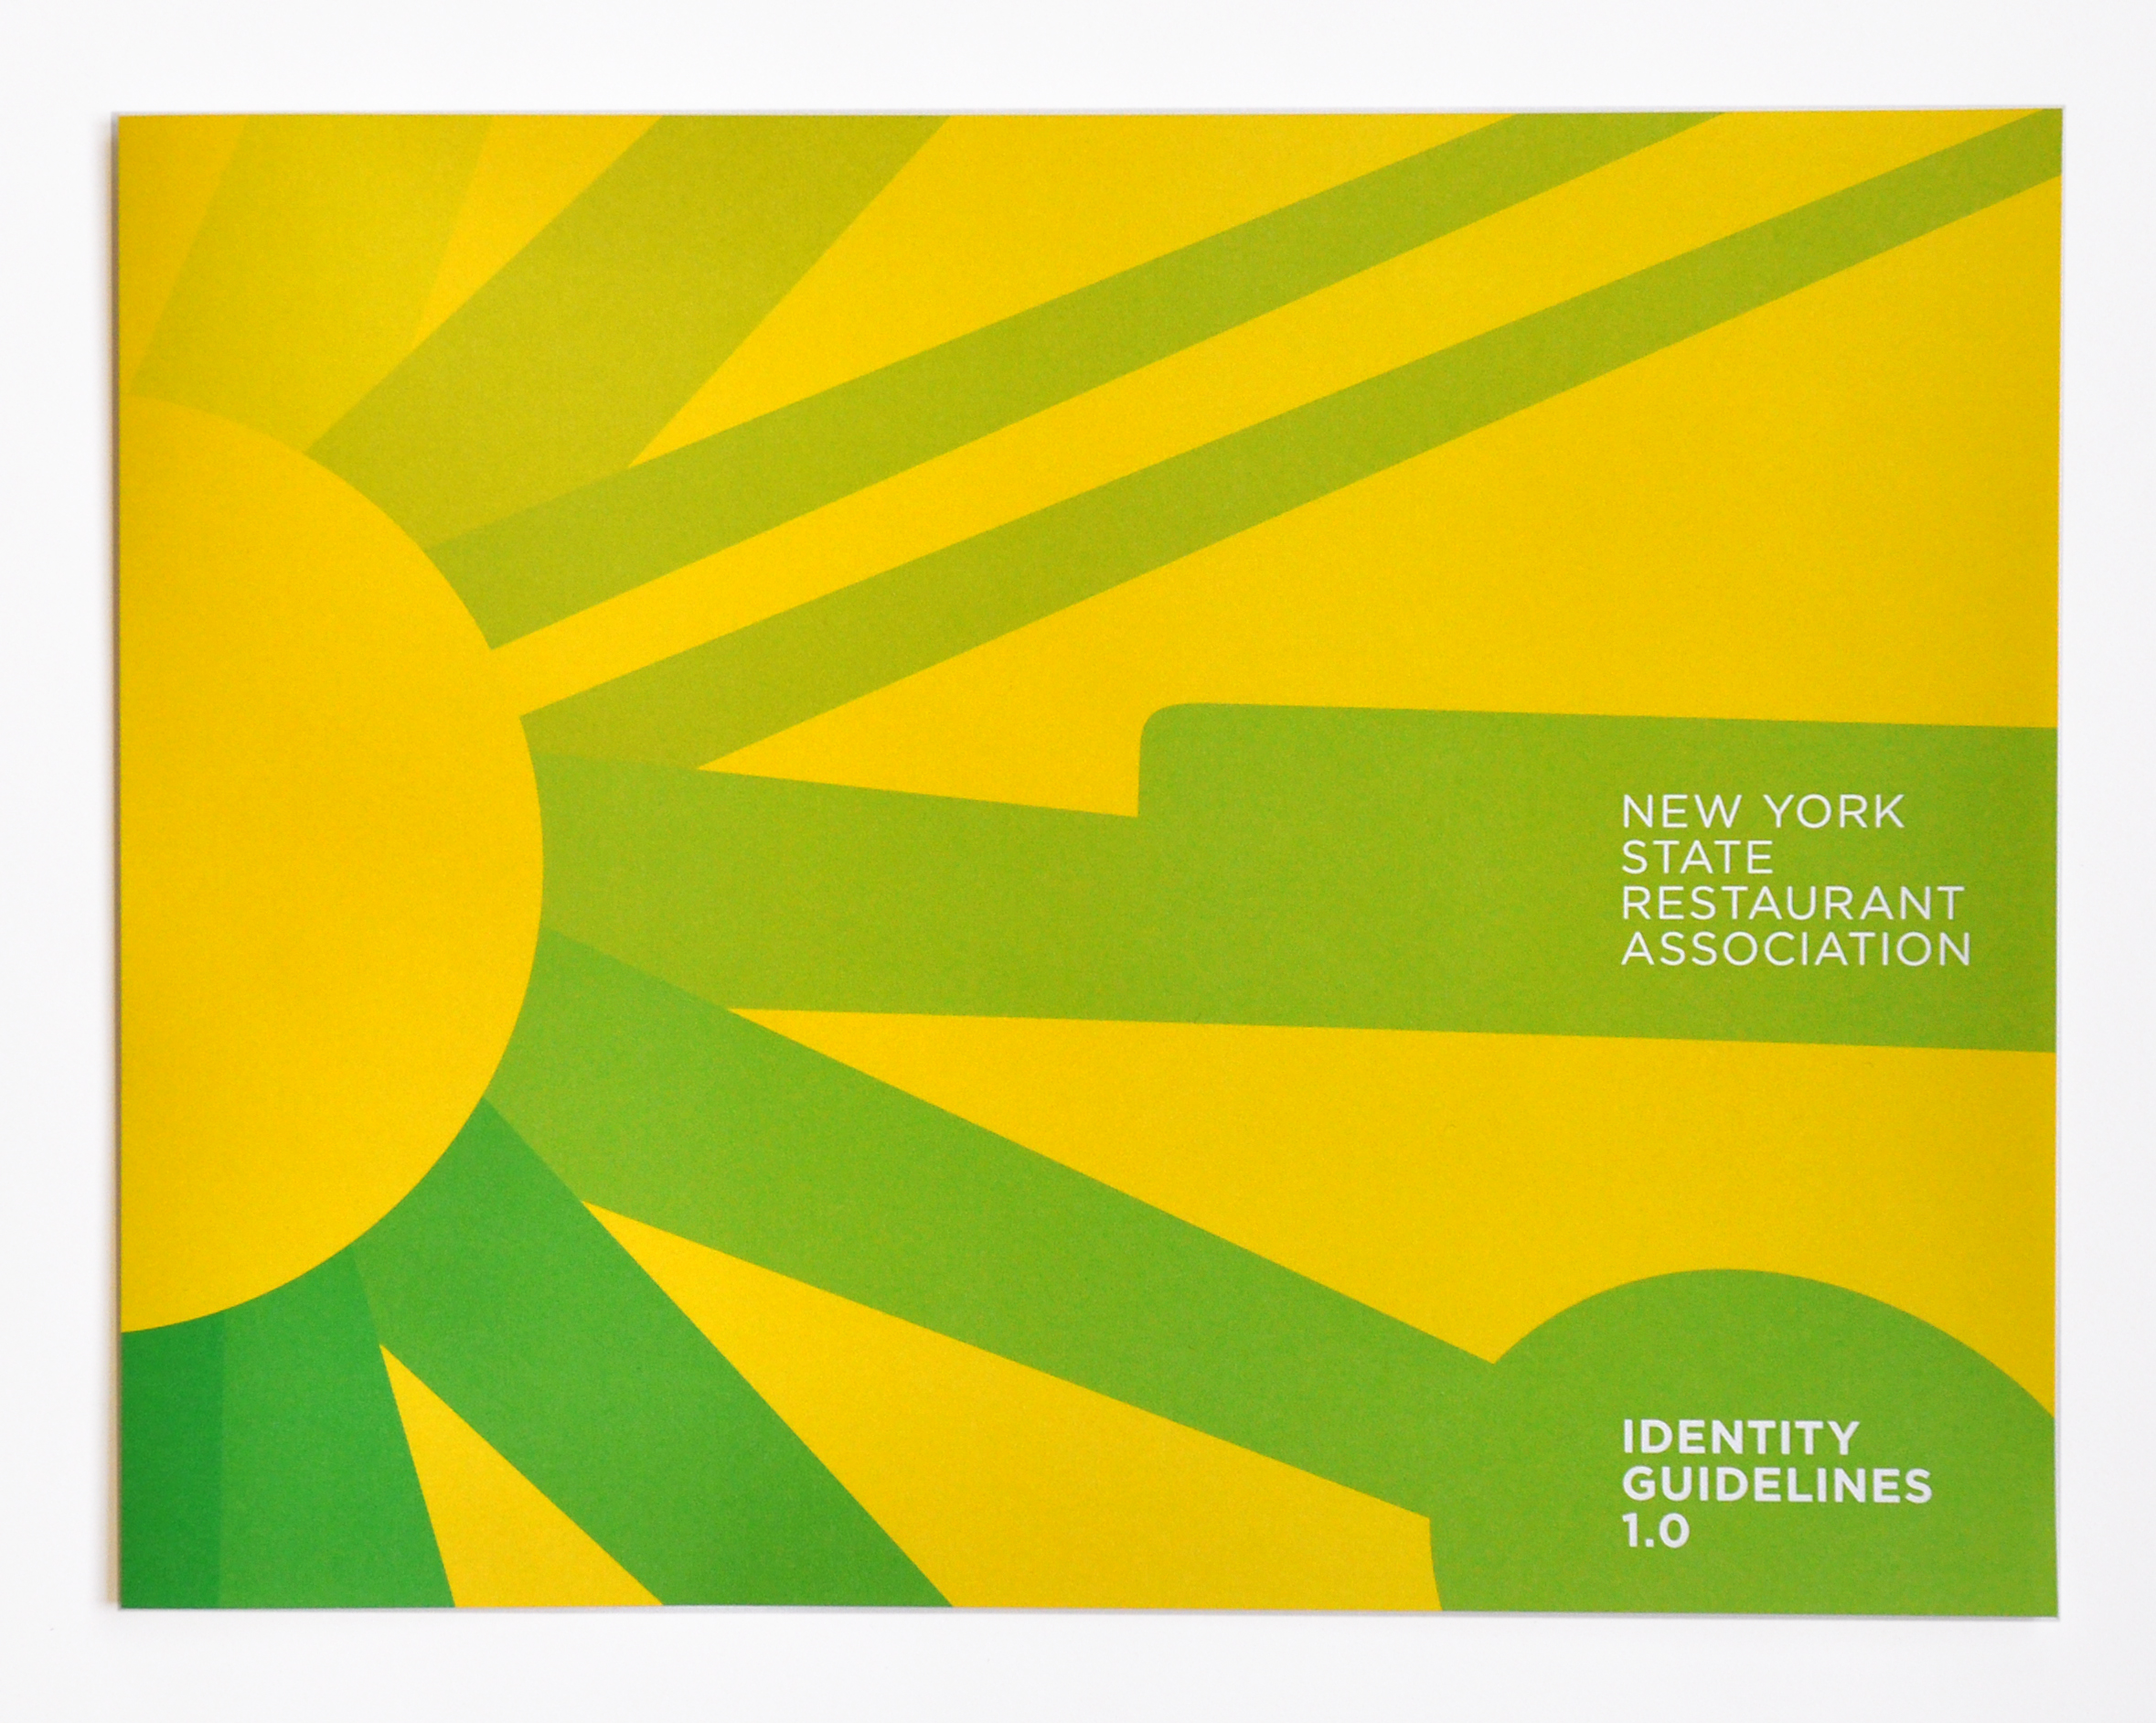 Project image 3 for NYSRA Identity, New York State Restaurant Association